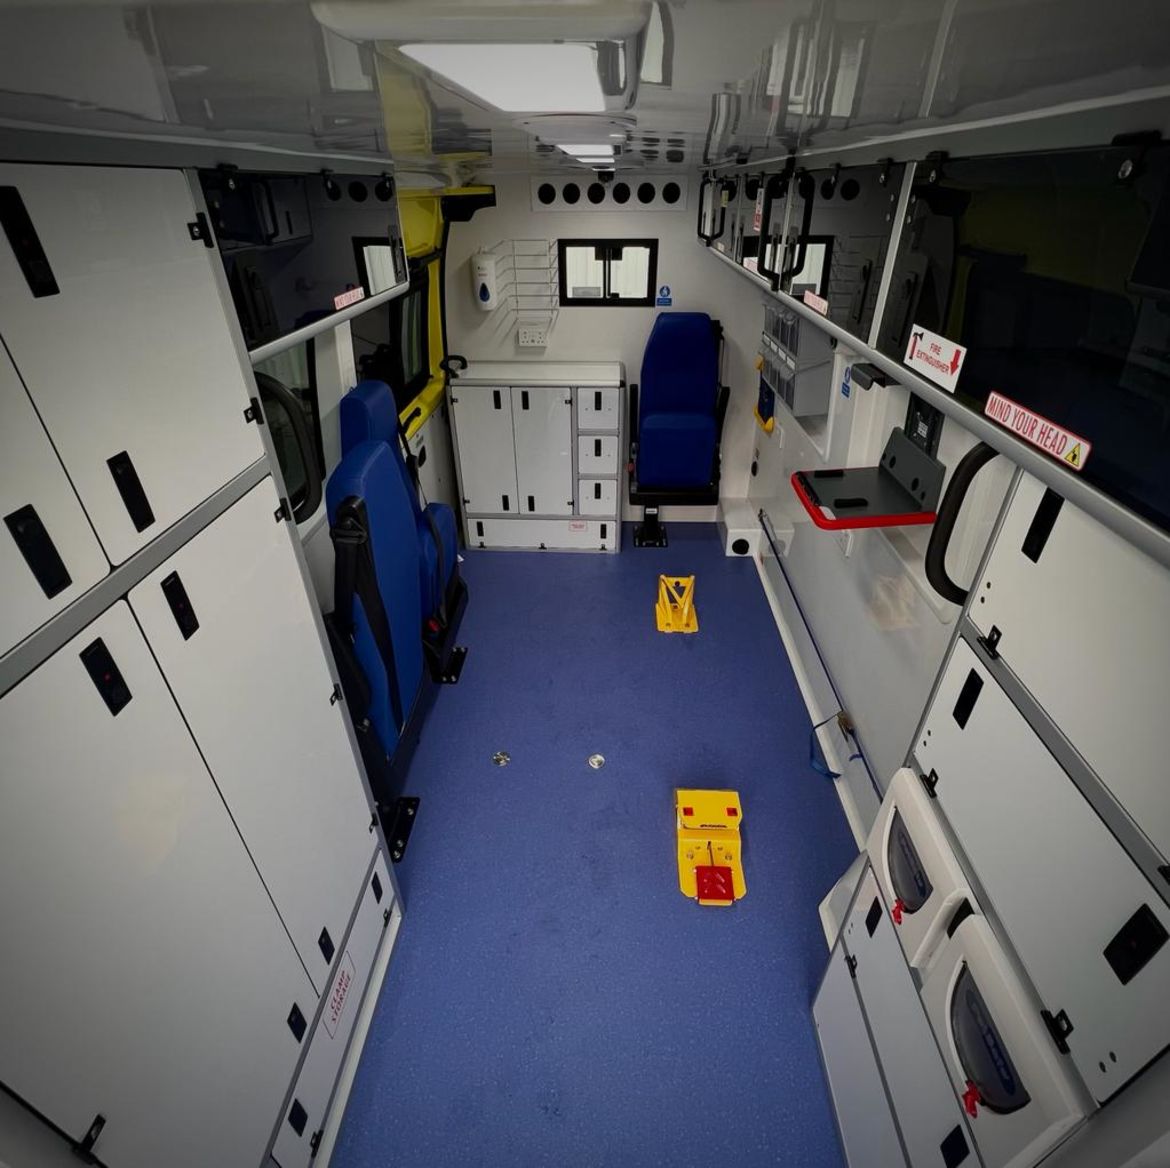 Rear patient compartment, stowage units and passenger comfort